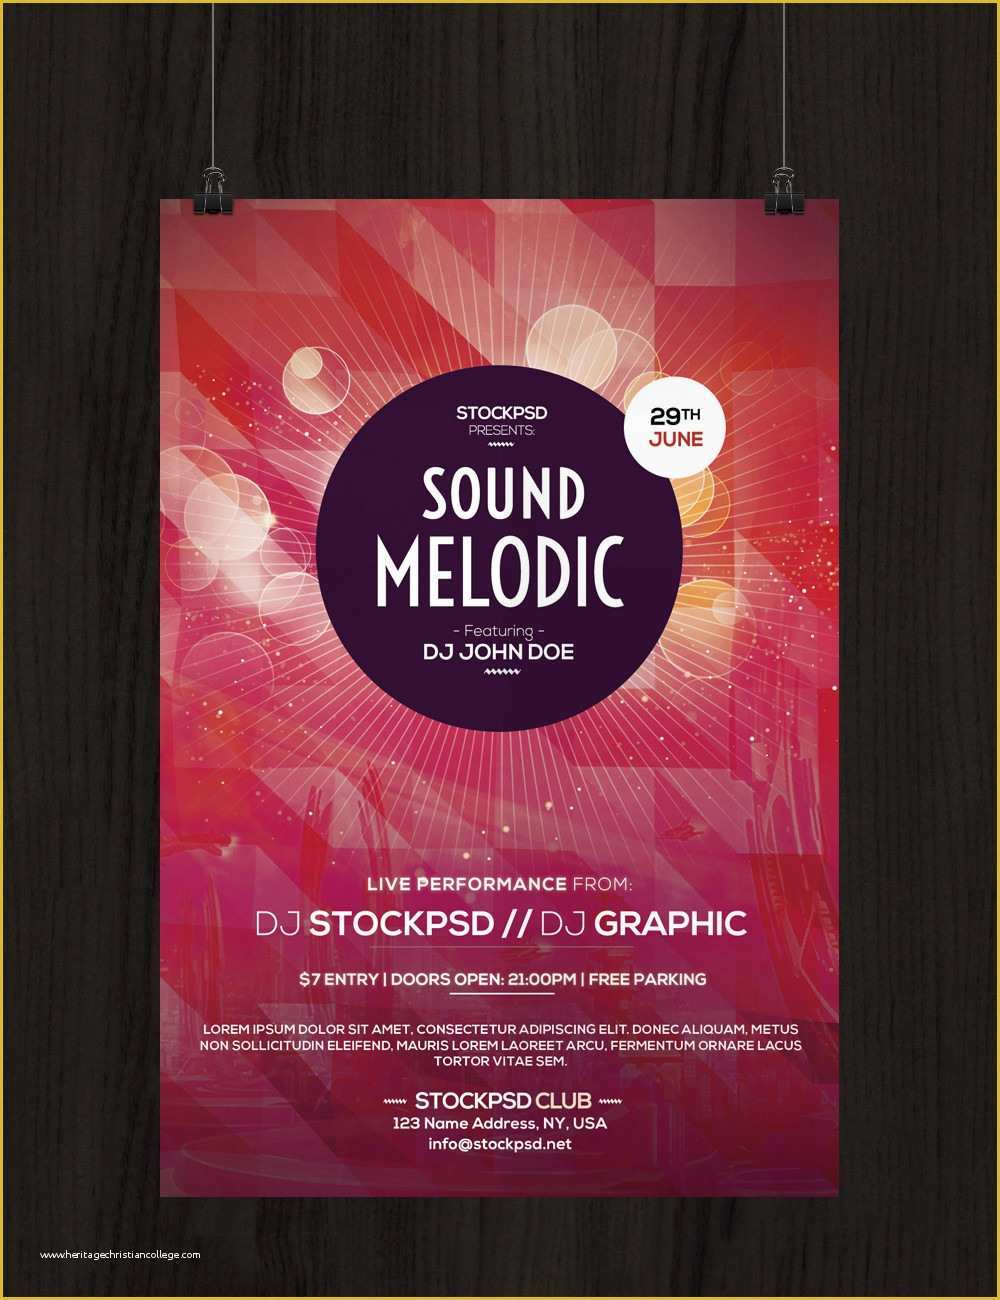 Free Ad Templates Photoshop Of sound Melodic Free Psd Flyer Template Free Psd Flyer